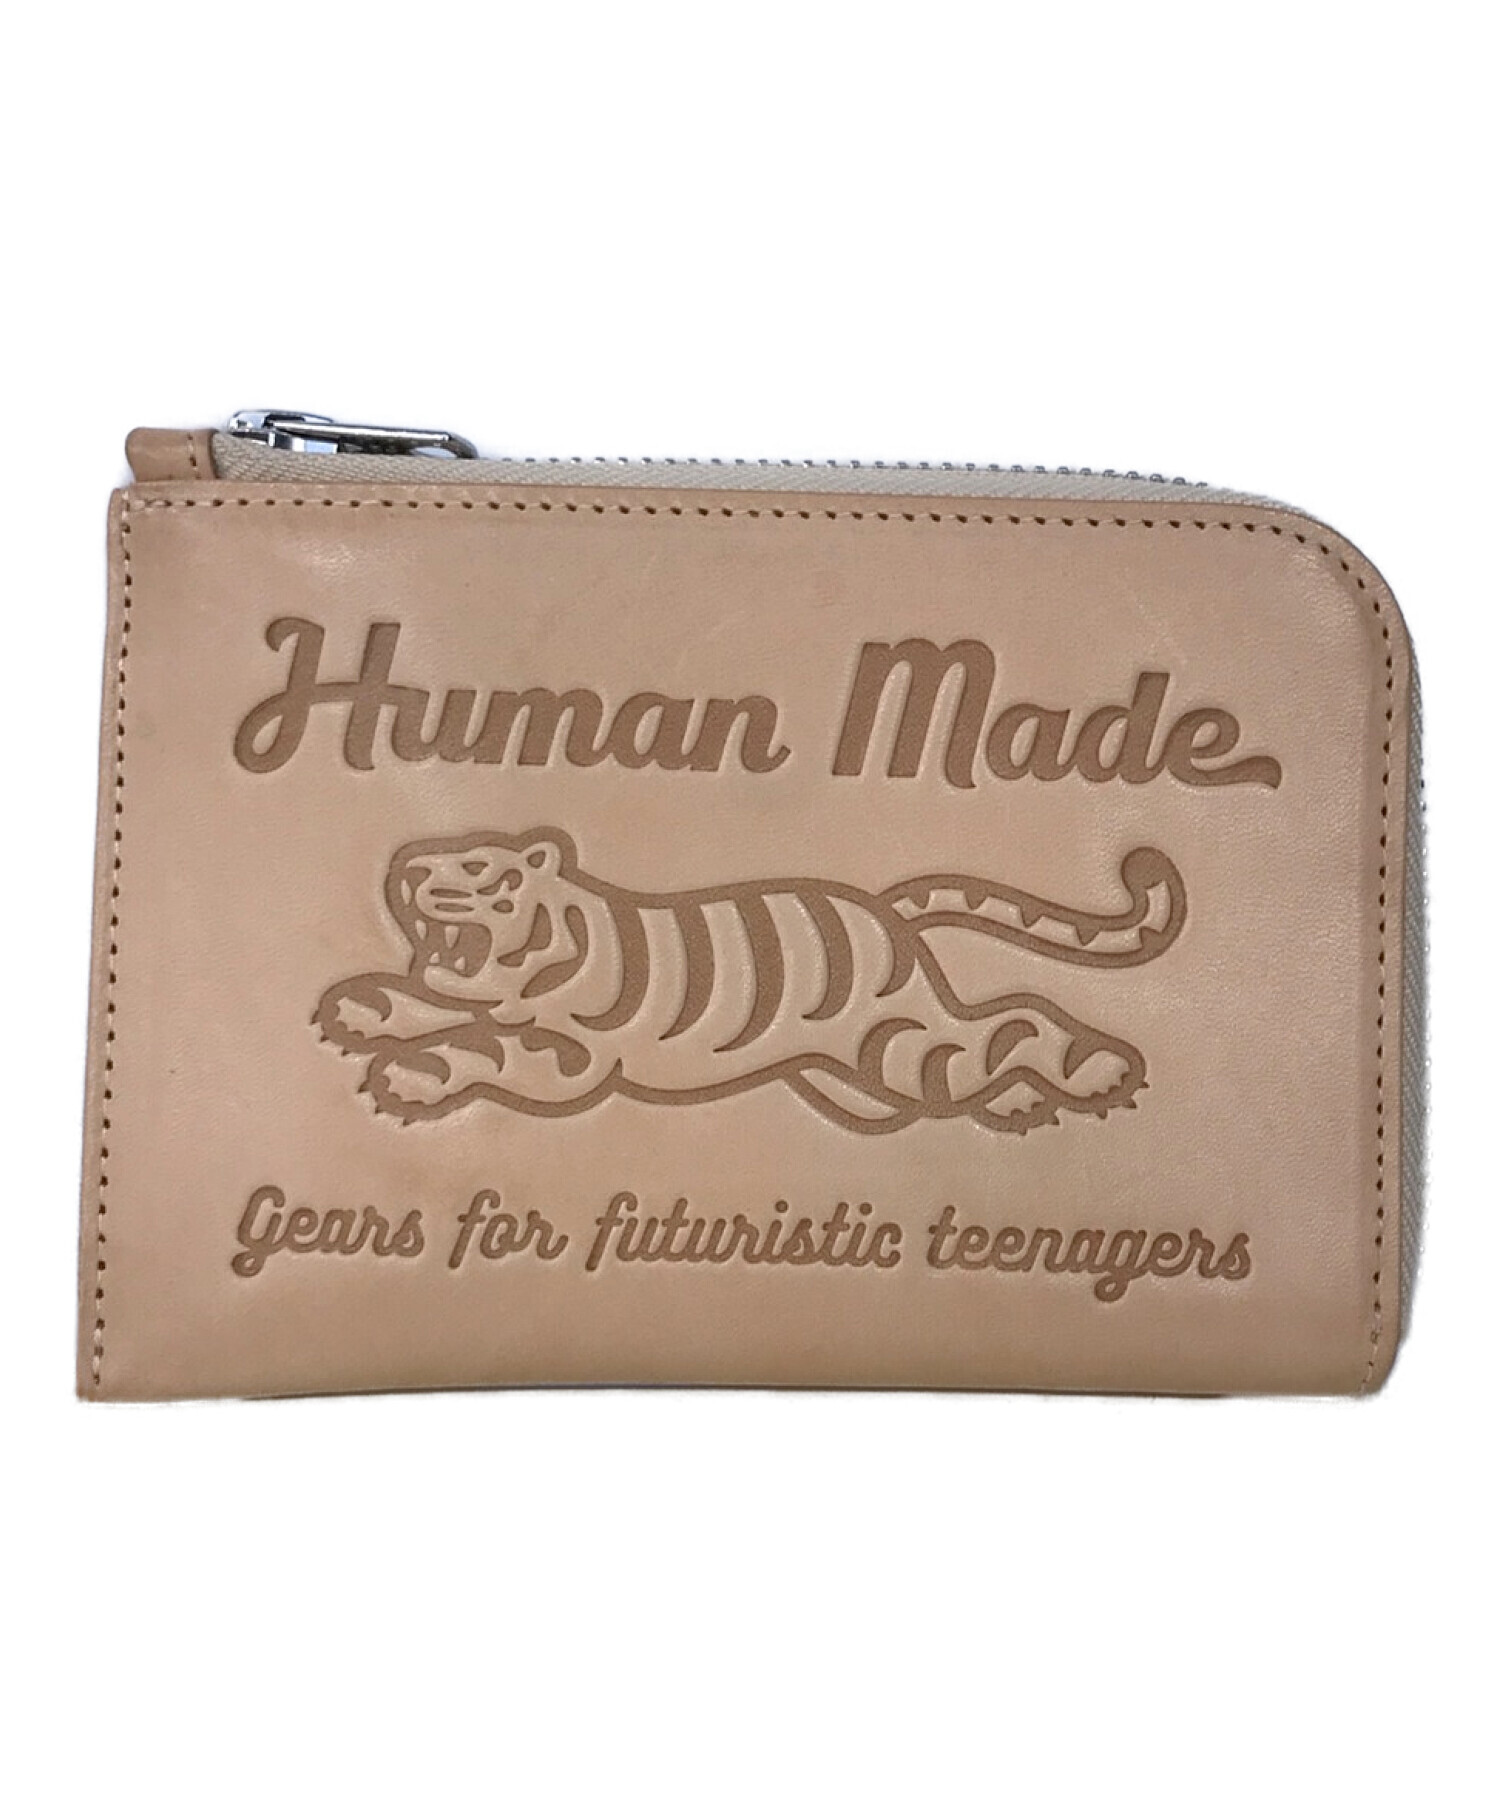 HUMAN MADE Leather Wallet \